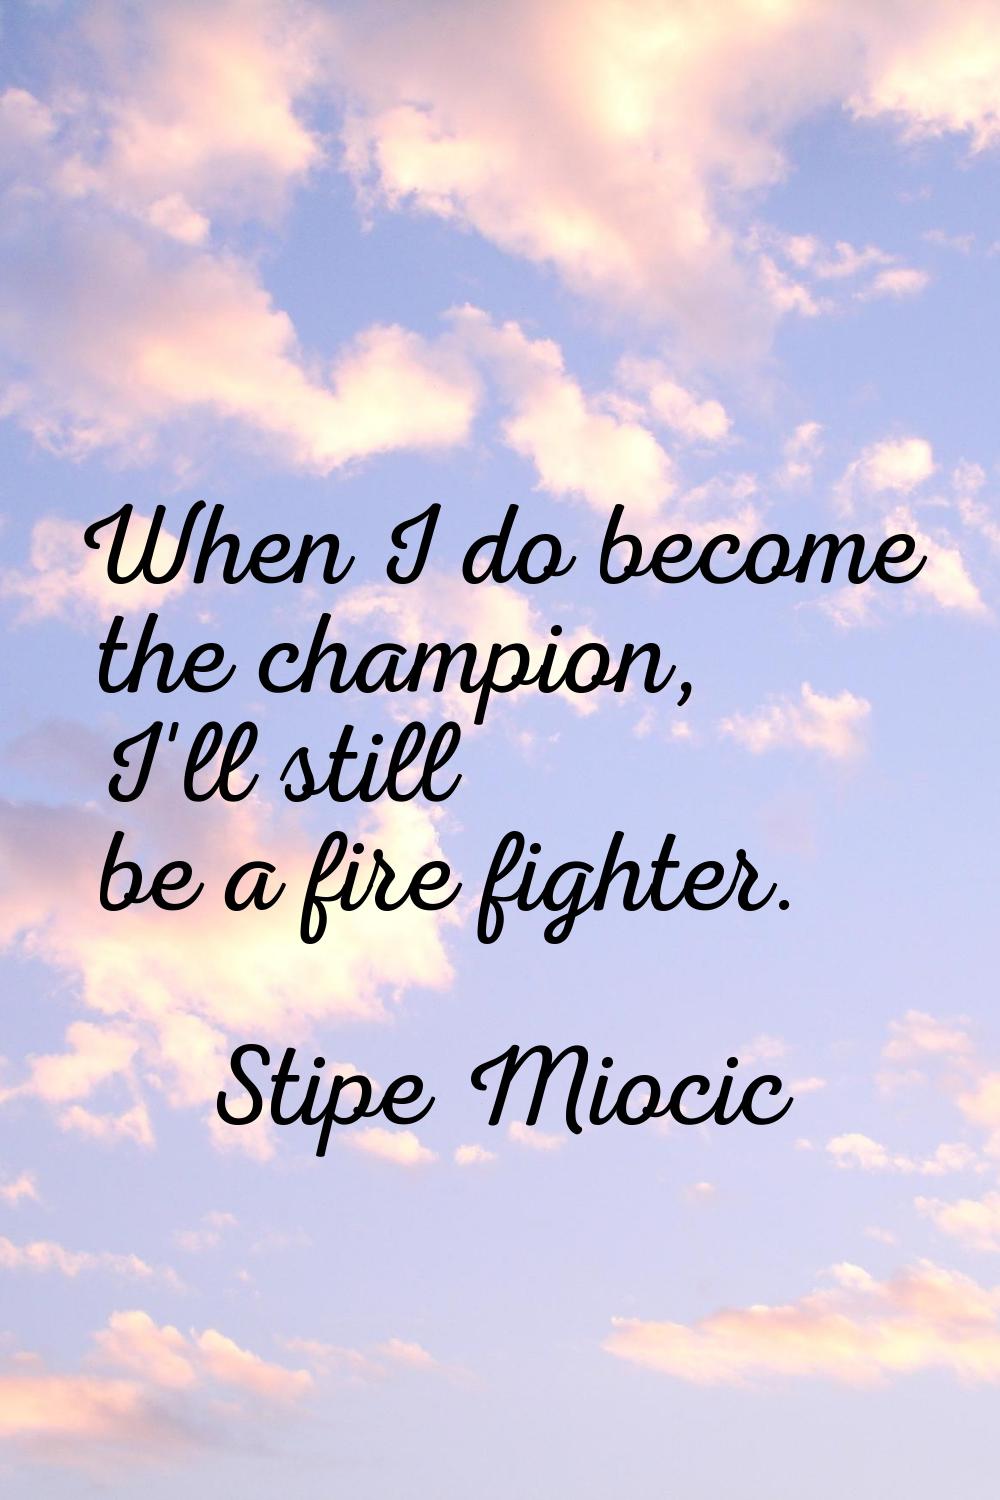 When I do become the champion, I'll still be a fire fighter.